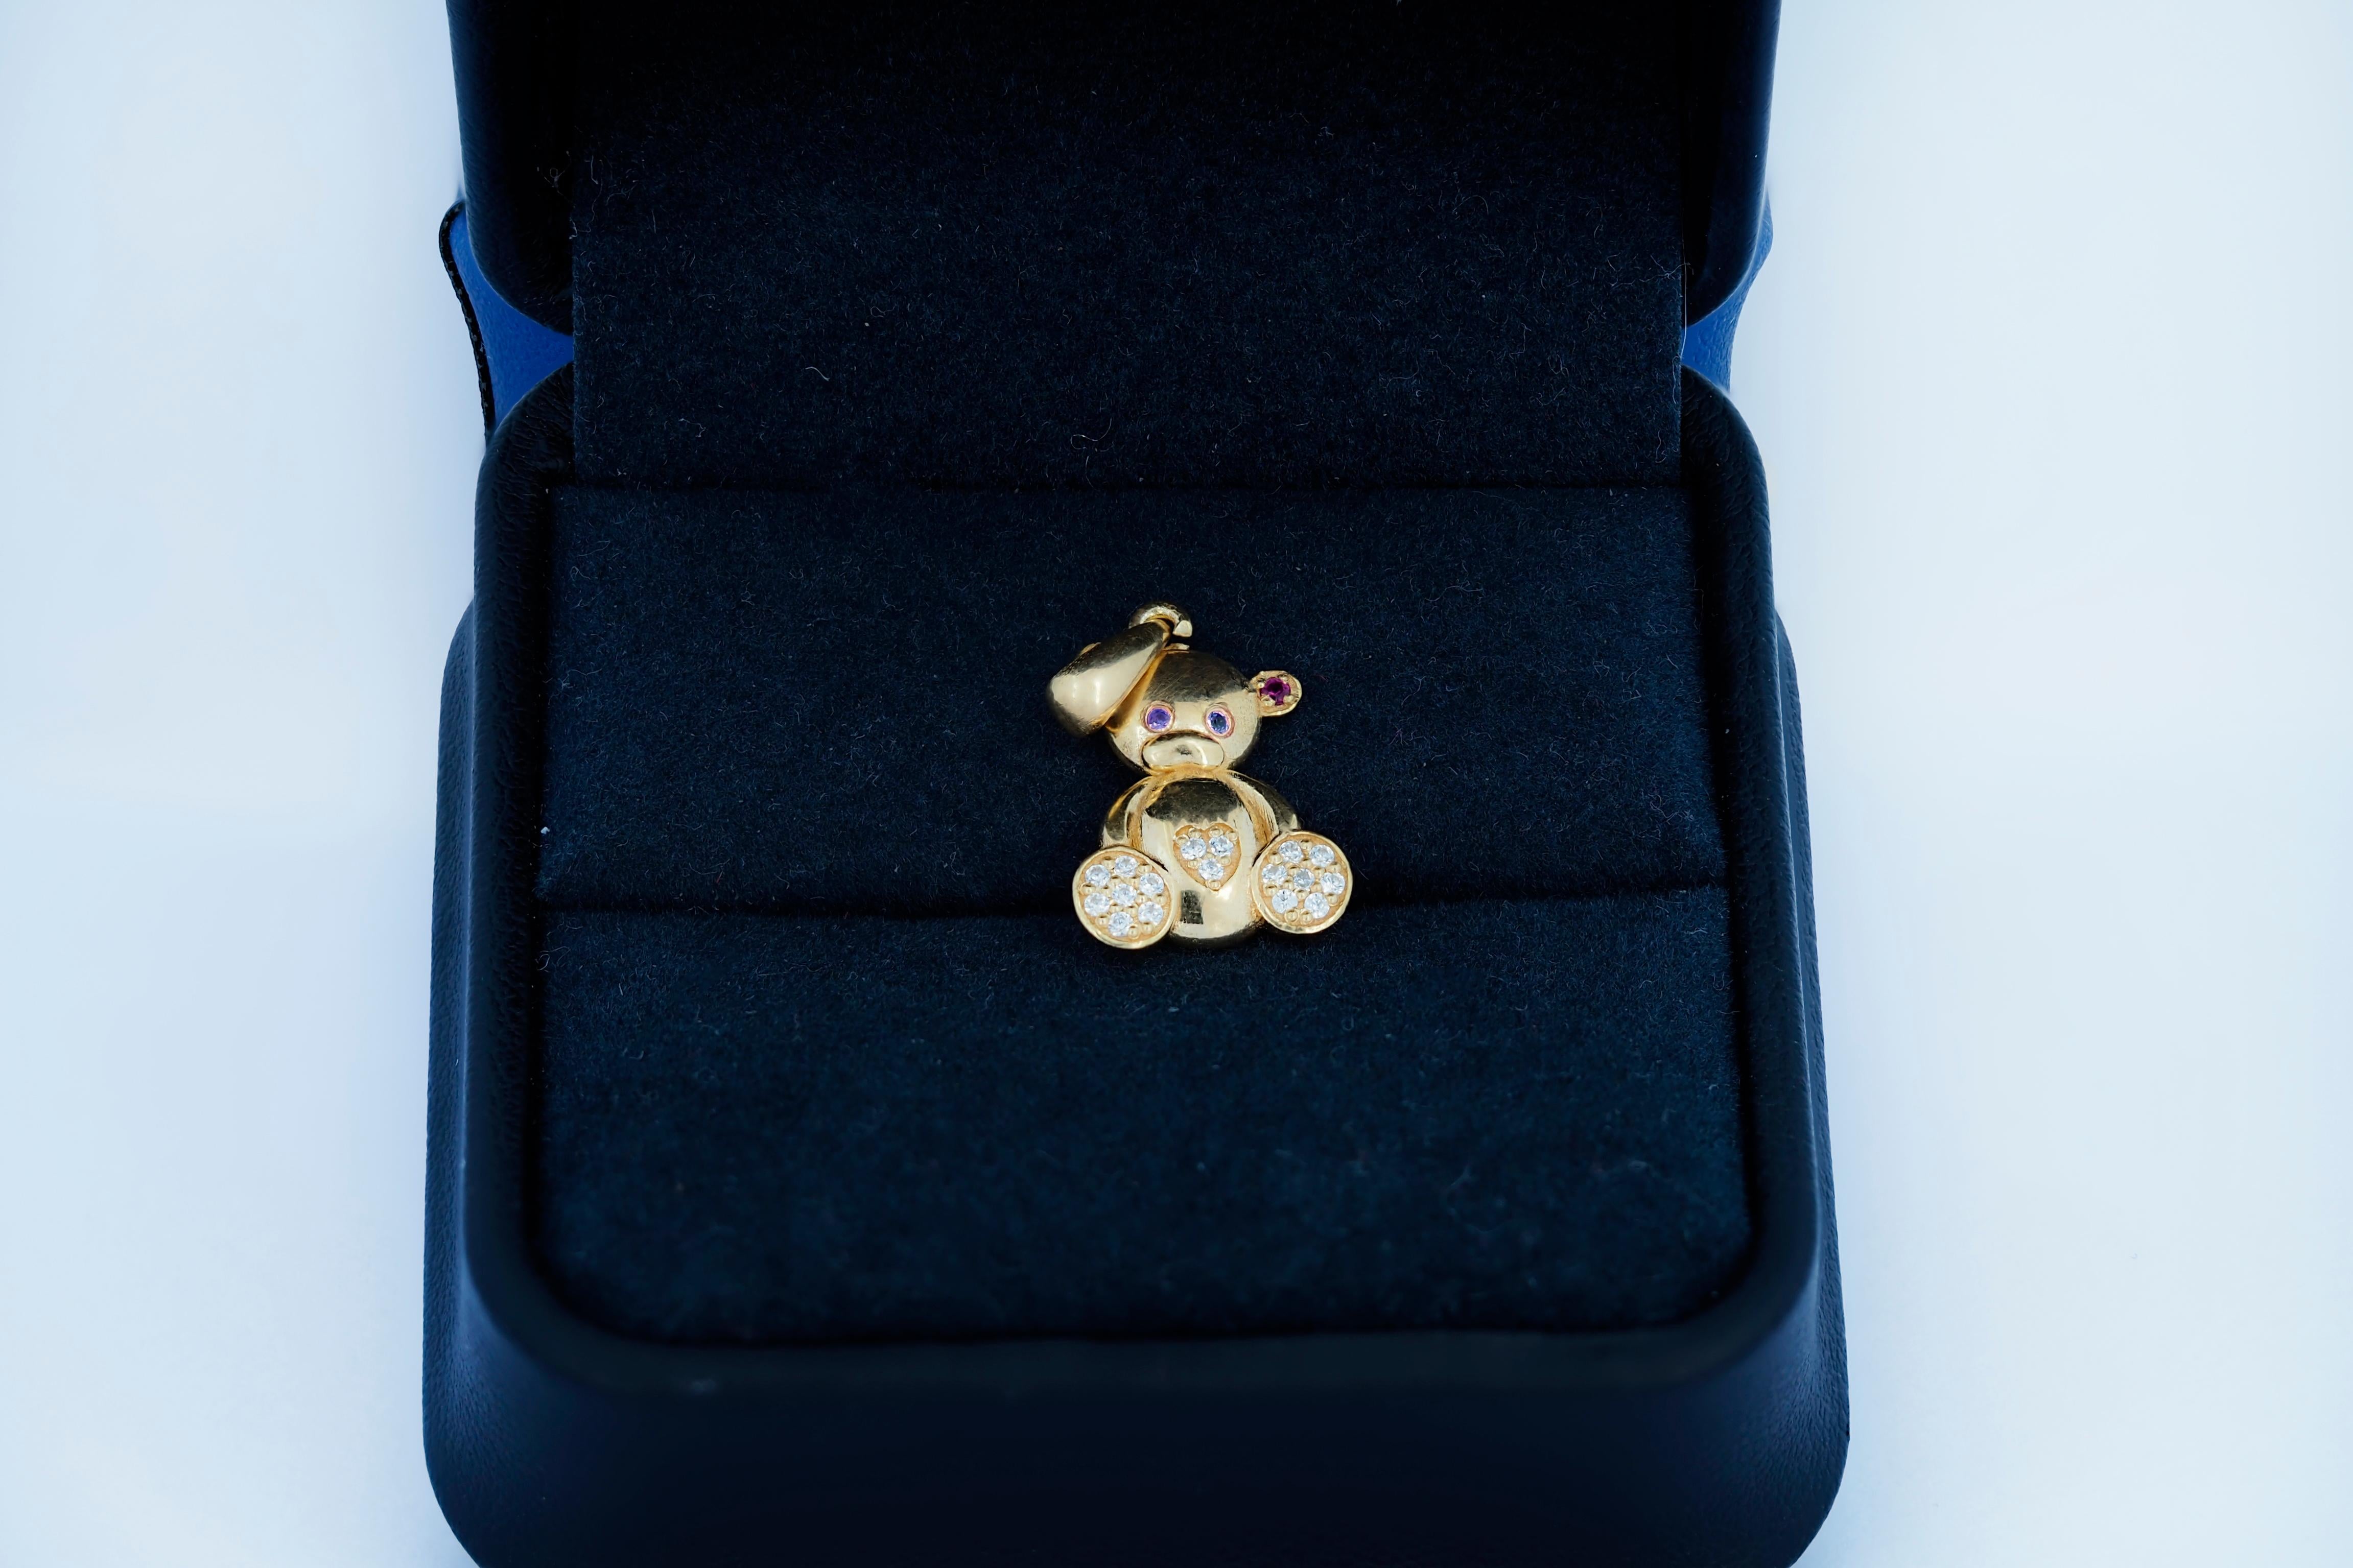 Teddy bear pendant in 14k gold. Puffed Gummy Pear Statement Necklace. Love Care Symbol Gold Pendant. Cute bear charm. 

Metal: 14k gold
Pendant size: 21.5x11.5
Weight: 1.7 gr
Pendant goes without necklace. If you need necklace also, let us